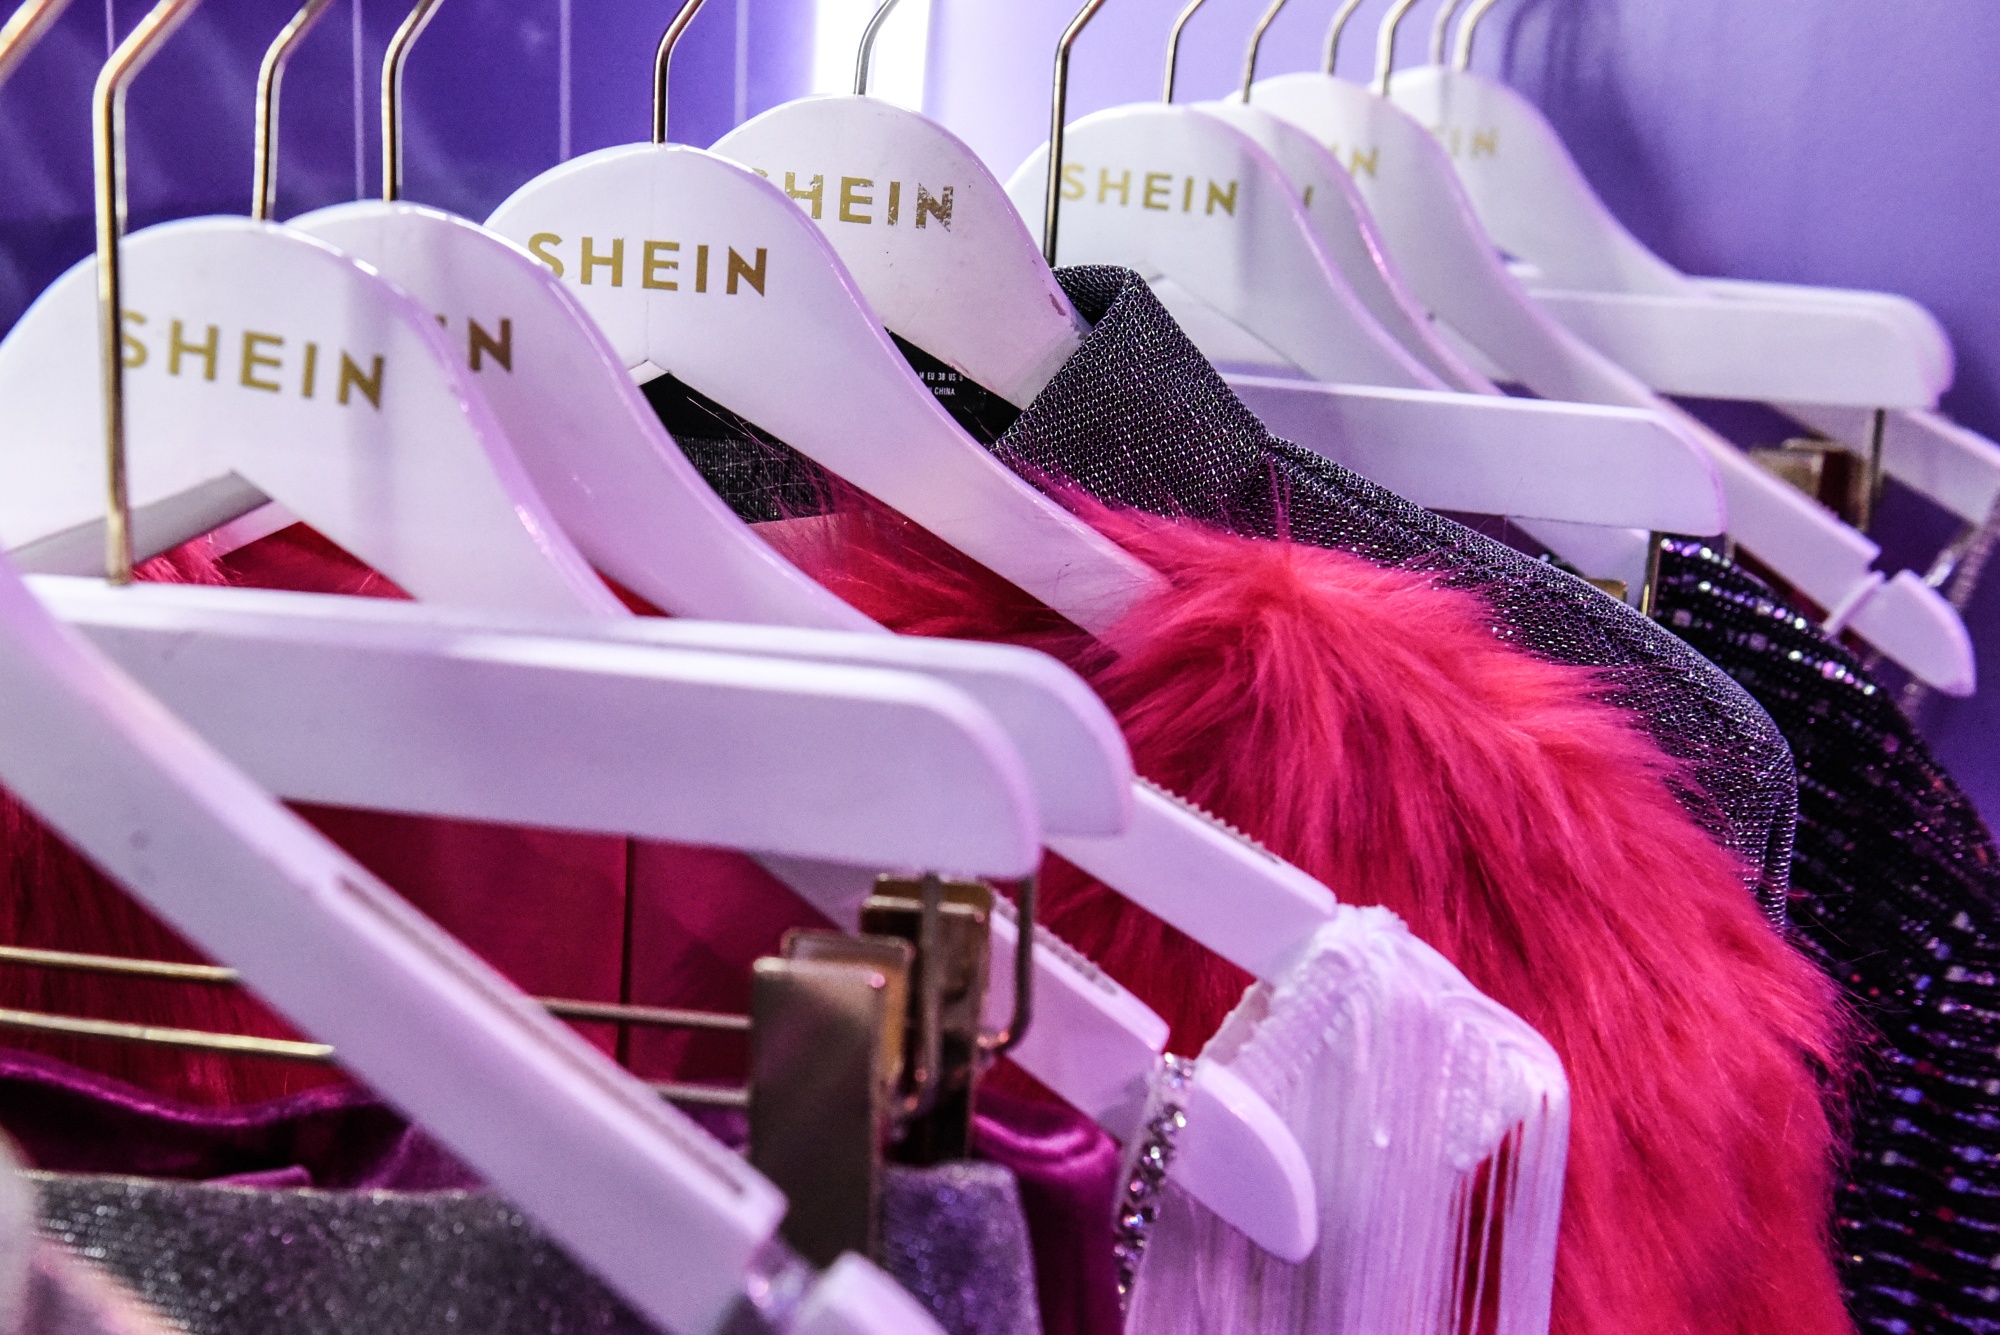 Fashion Retailer Shein's Competitors Are Copying Its Super-Fast Business  Model - Bloomberg